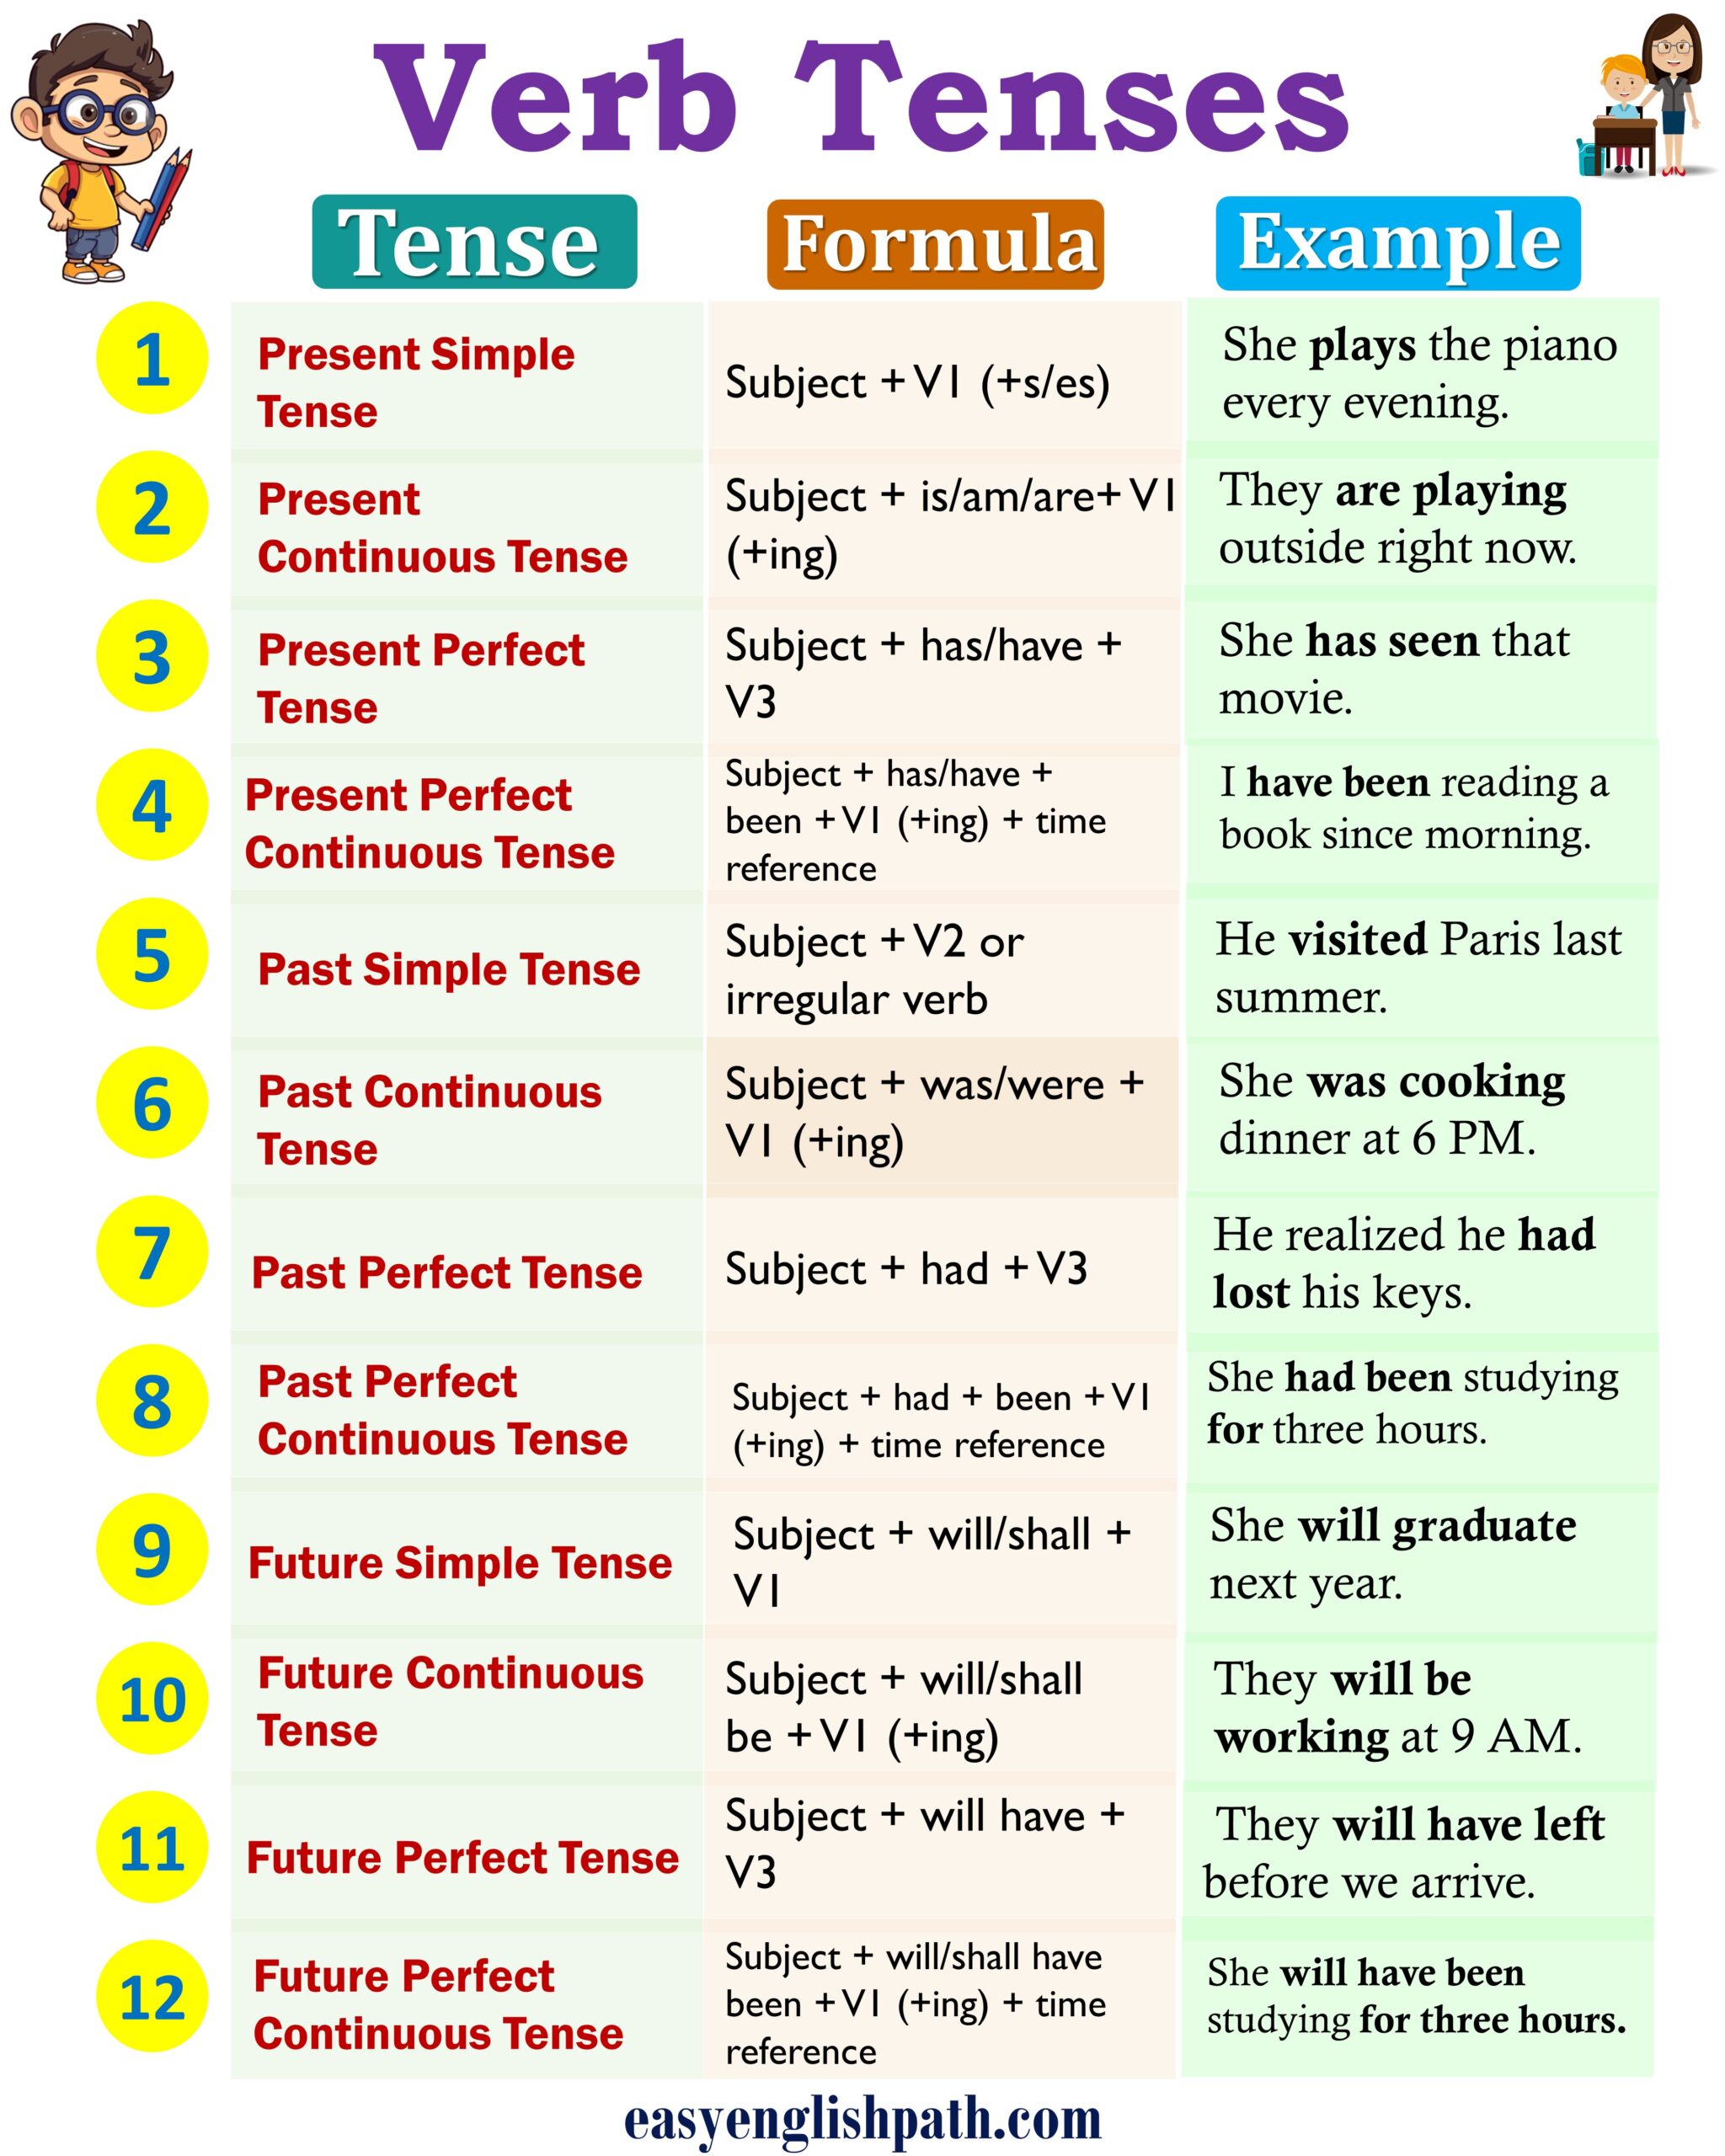 Verb Tenses: Definition, Uses, and Examples in English - EasyEnglishPath